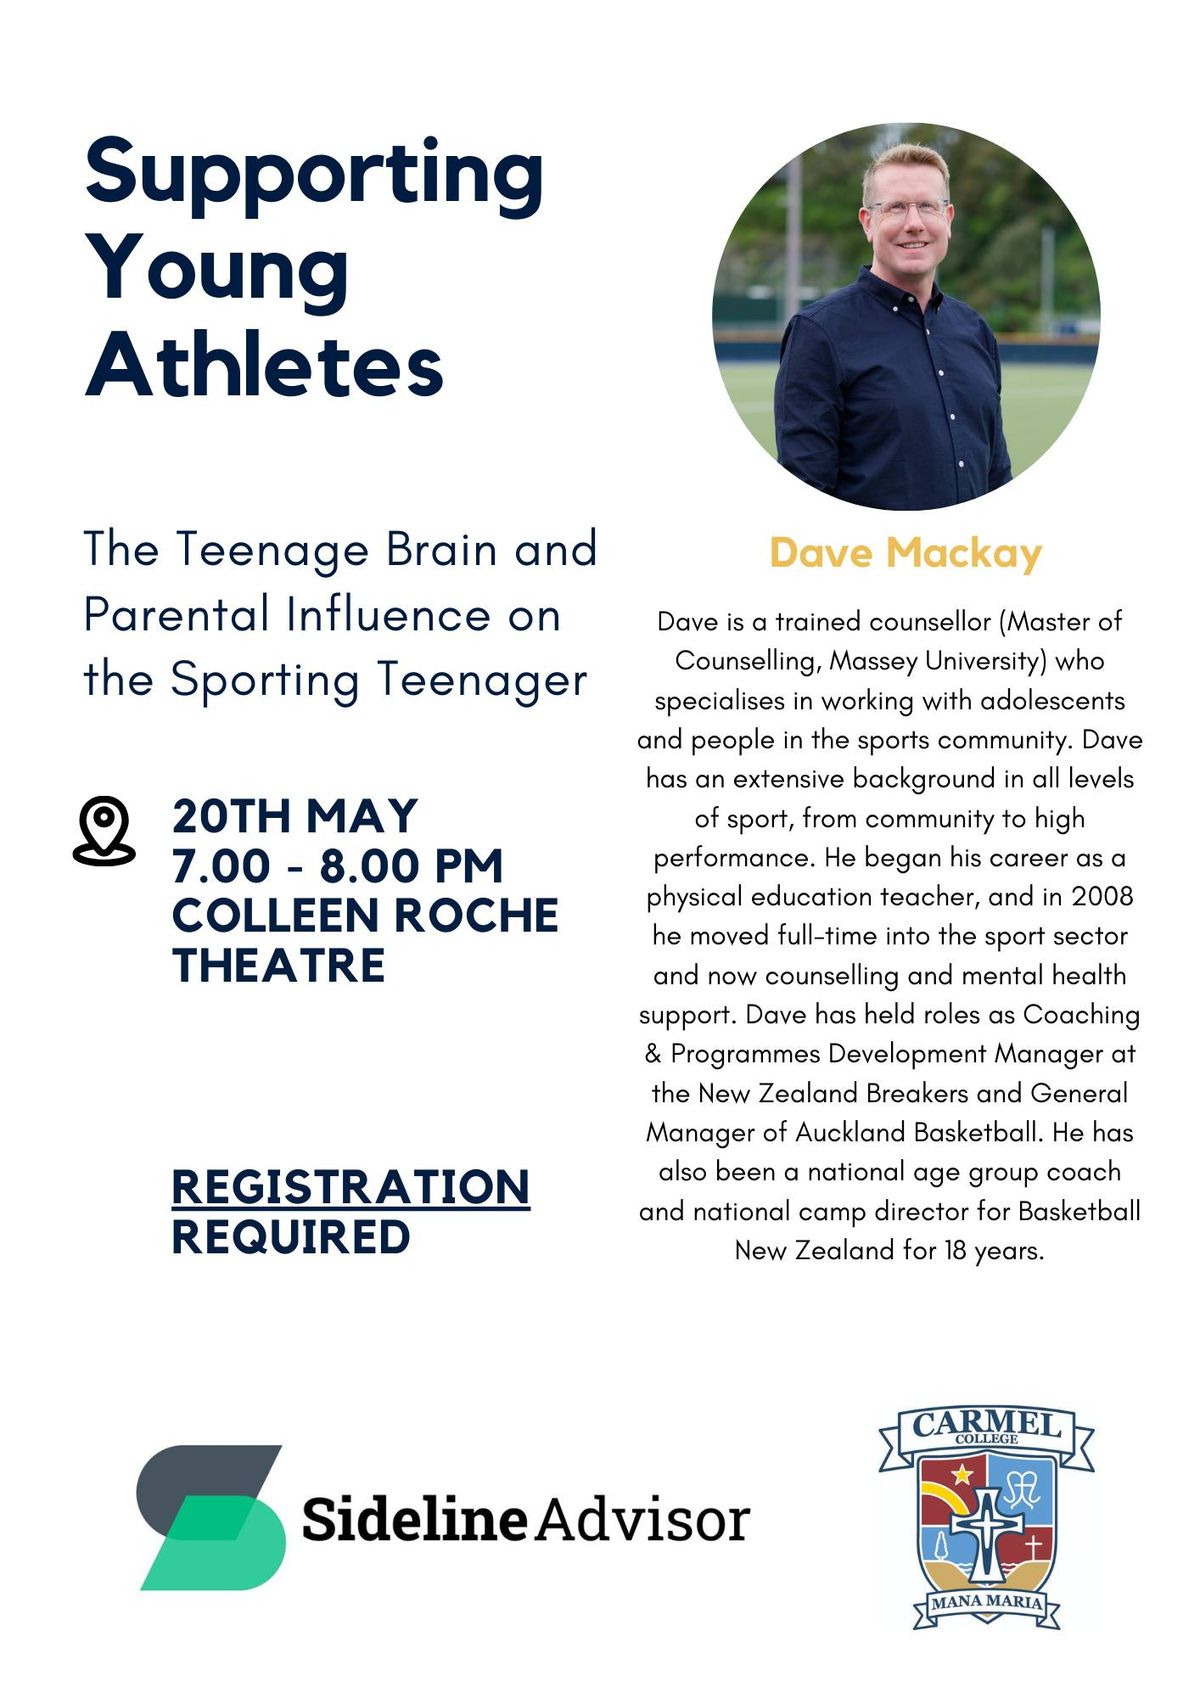 The teenage brain and Parental Influence on the Sporting Teenager